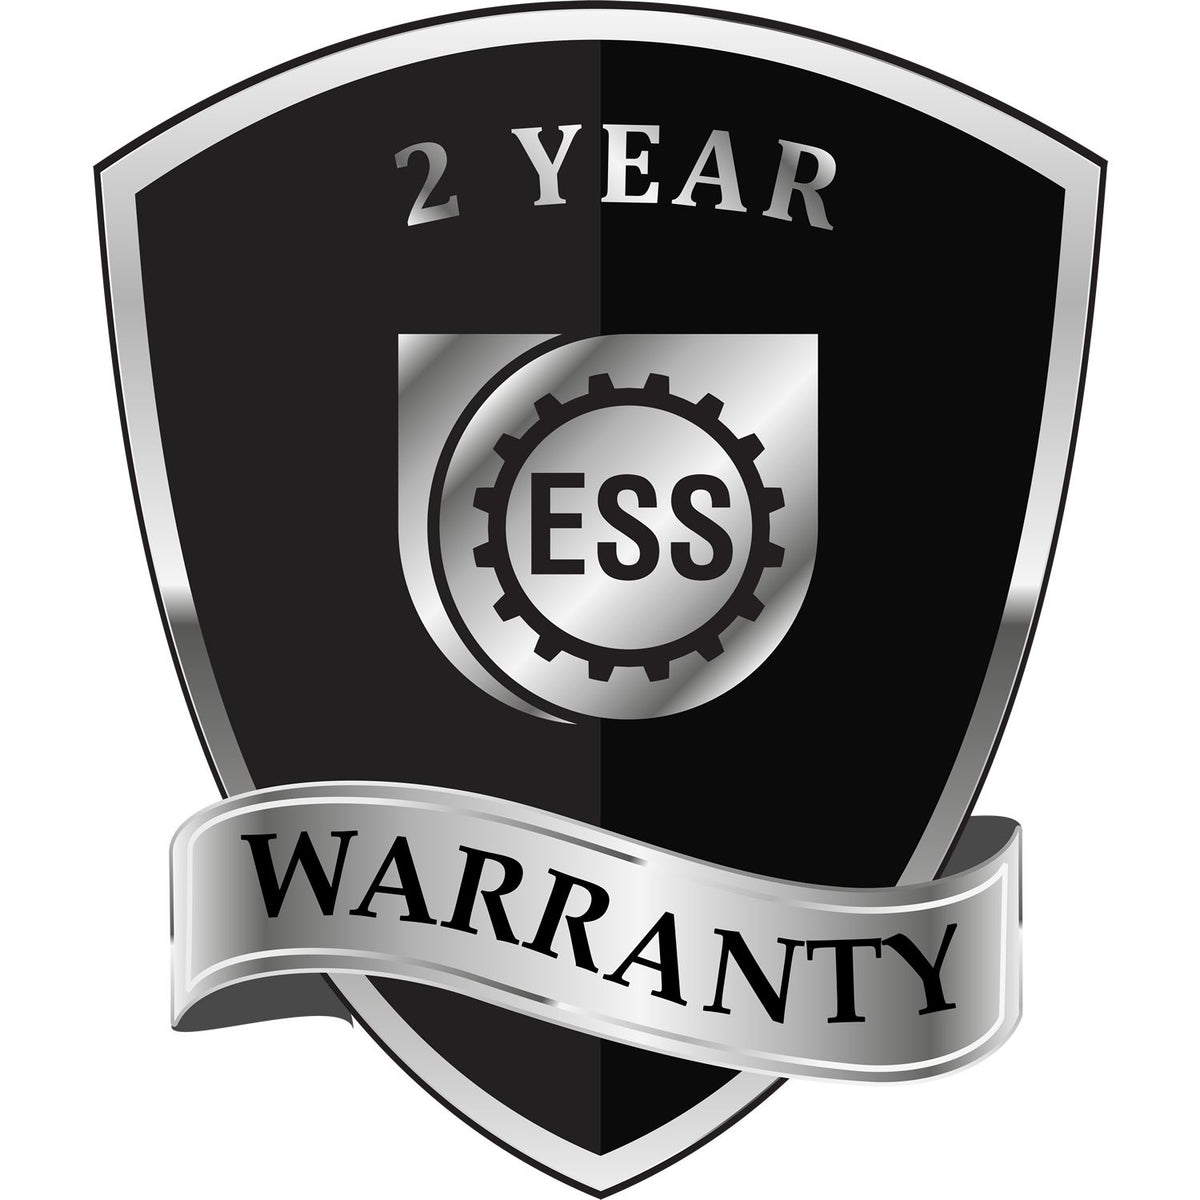 A badge or emblem showing a warranty icon for the Extended Long Reach Missouri Architect Seal Embosser